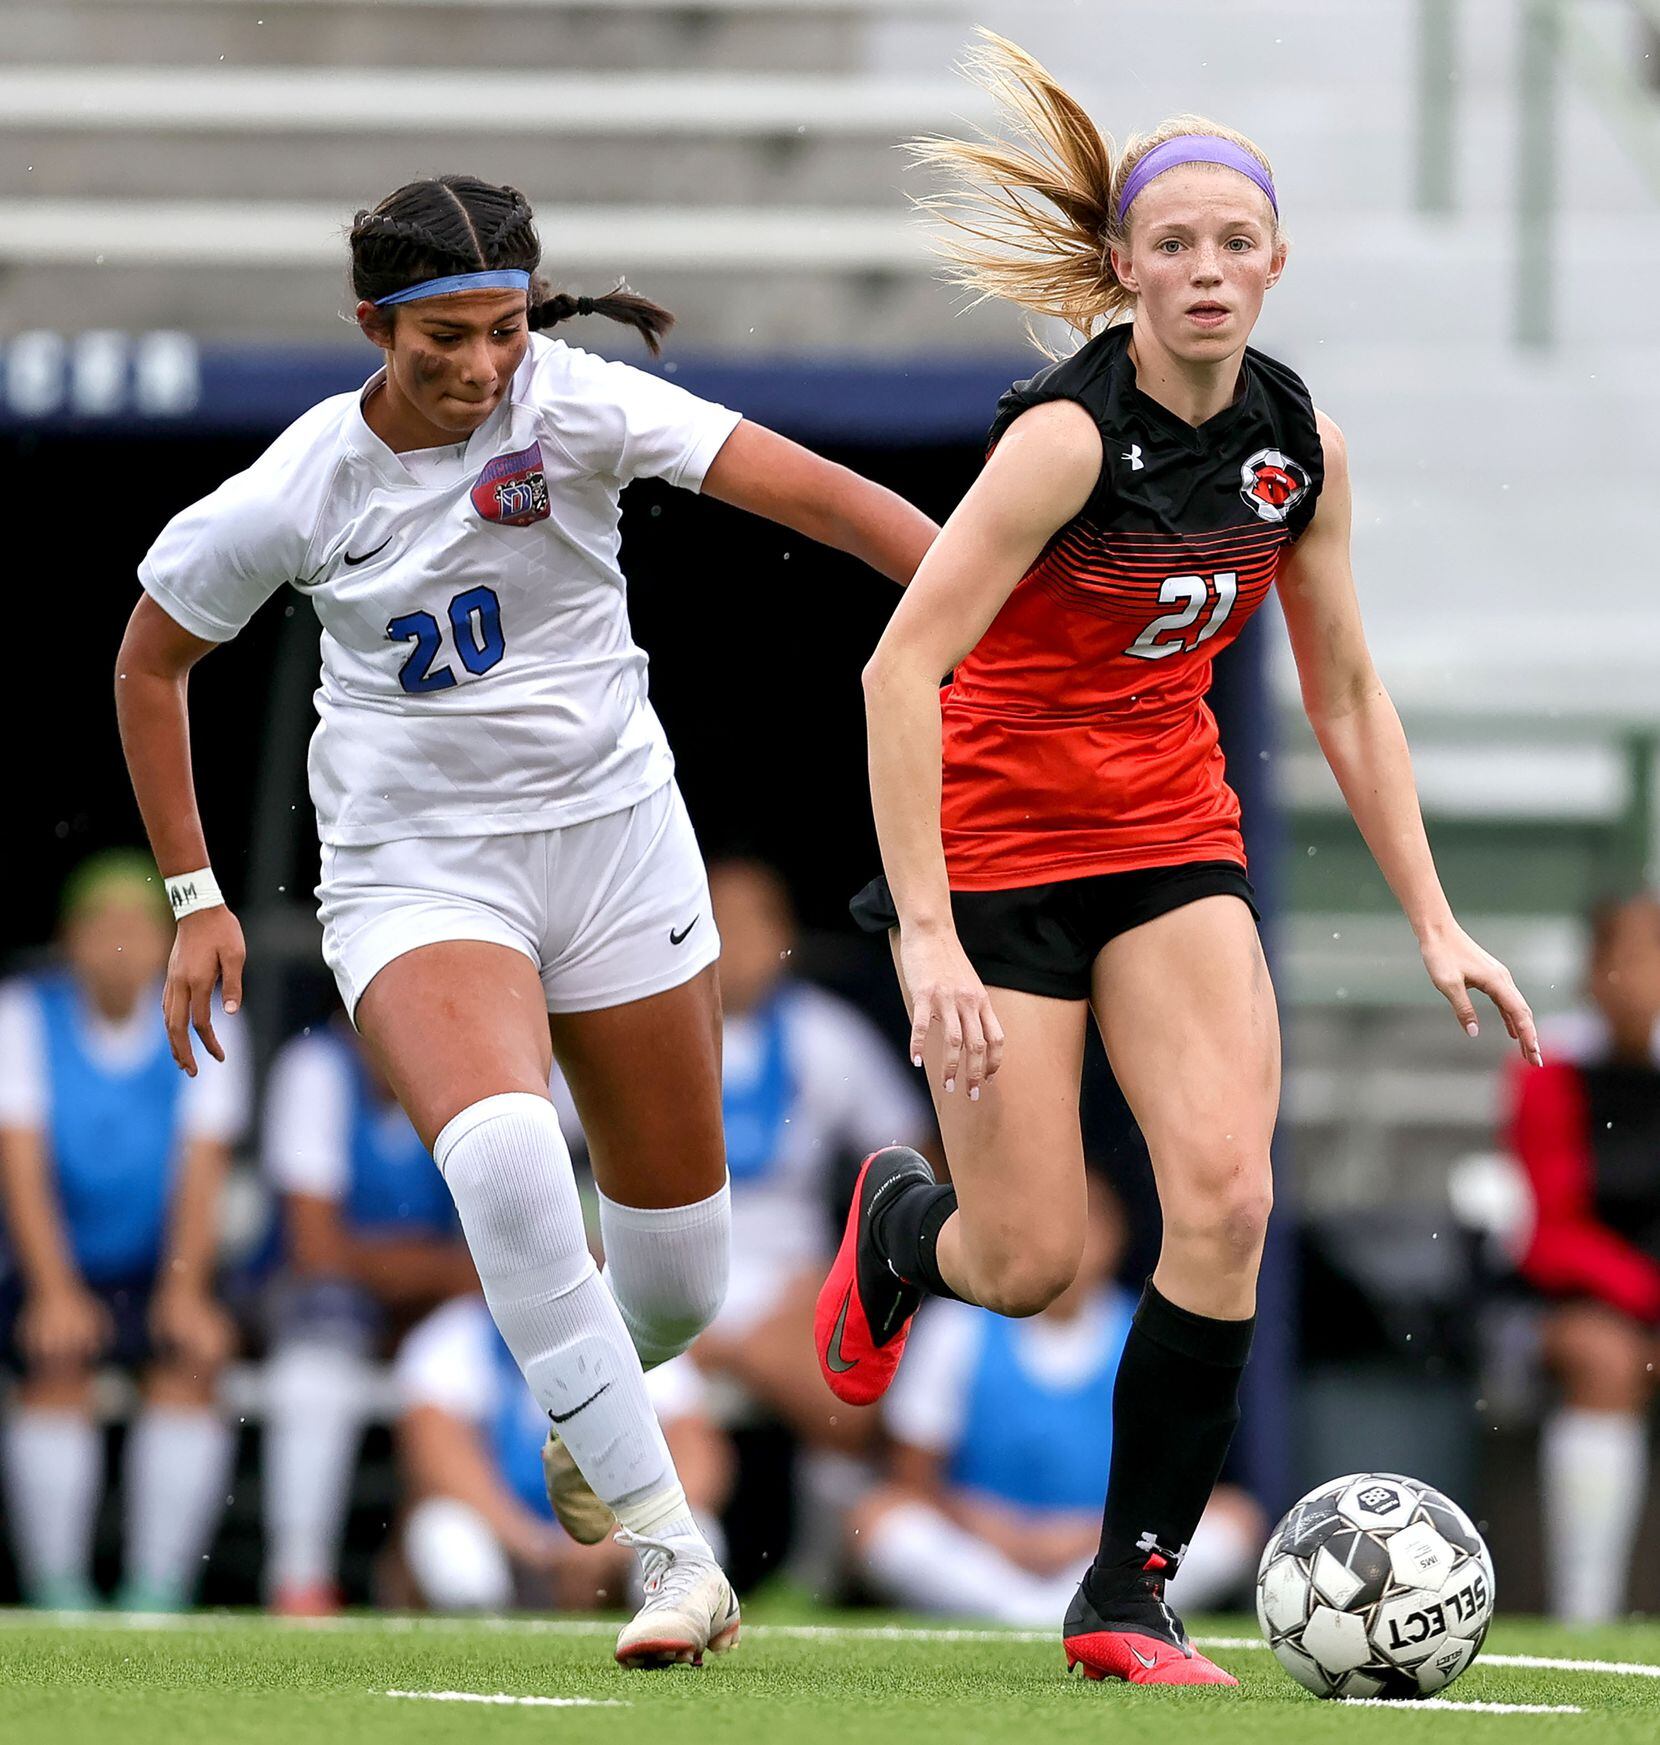 Rockwall Avery Shipman (21) tries to get past Duncanville Marily Garza (20) during the first...